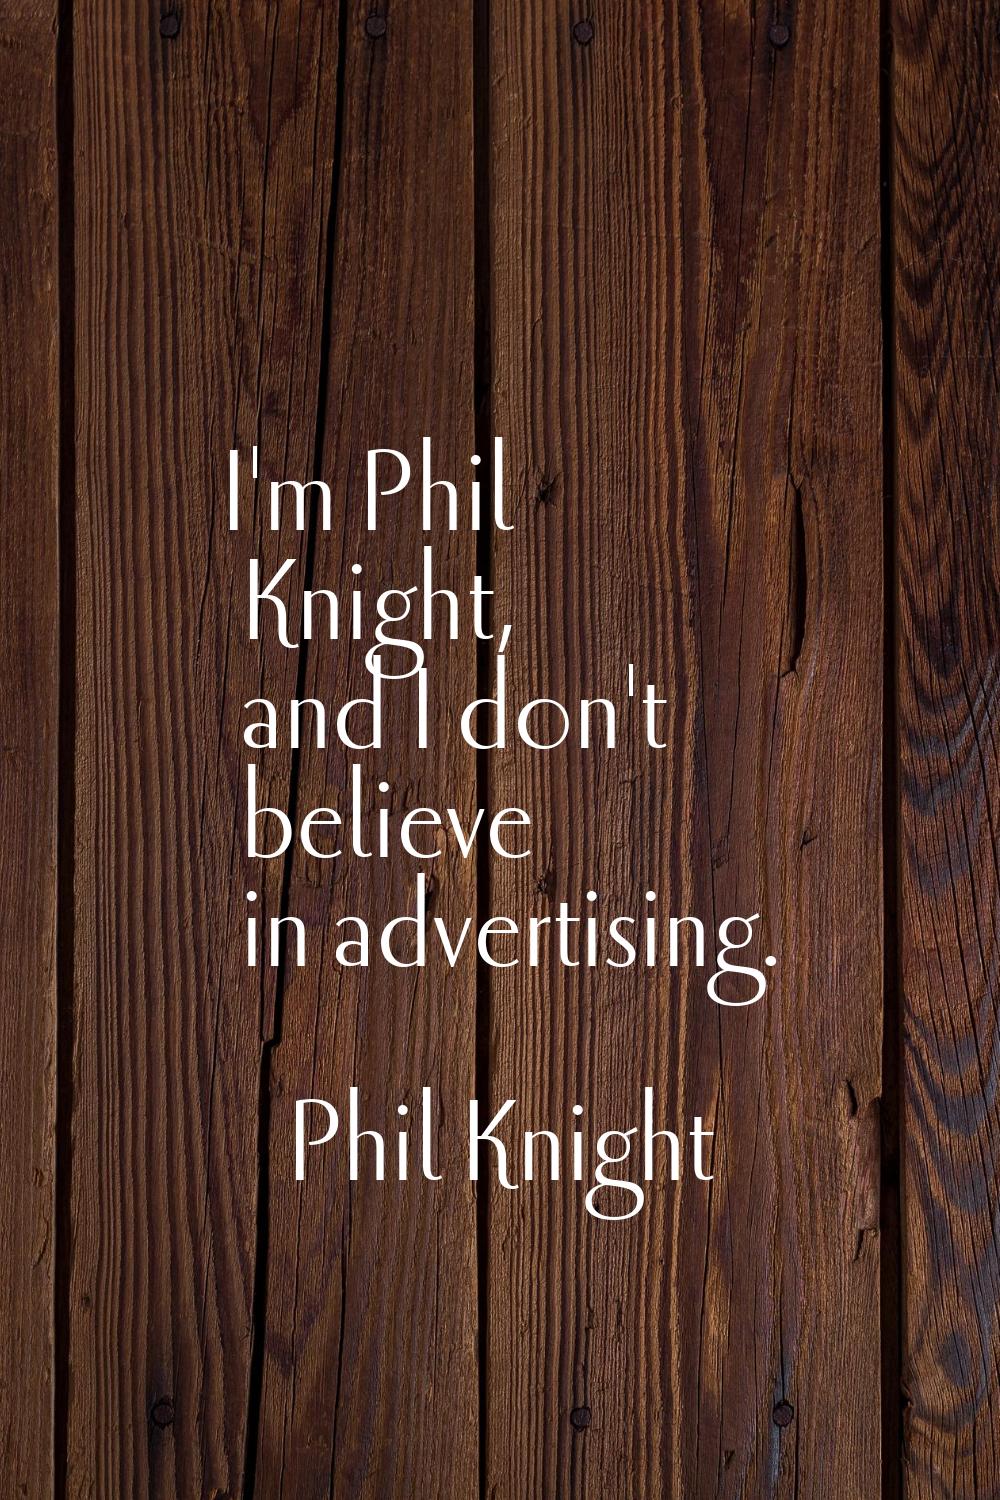 I'm Phil Knight, and I don't believe in advertising.